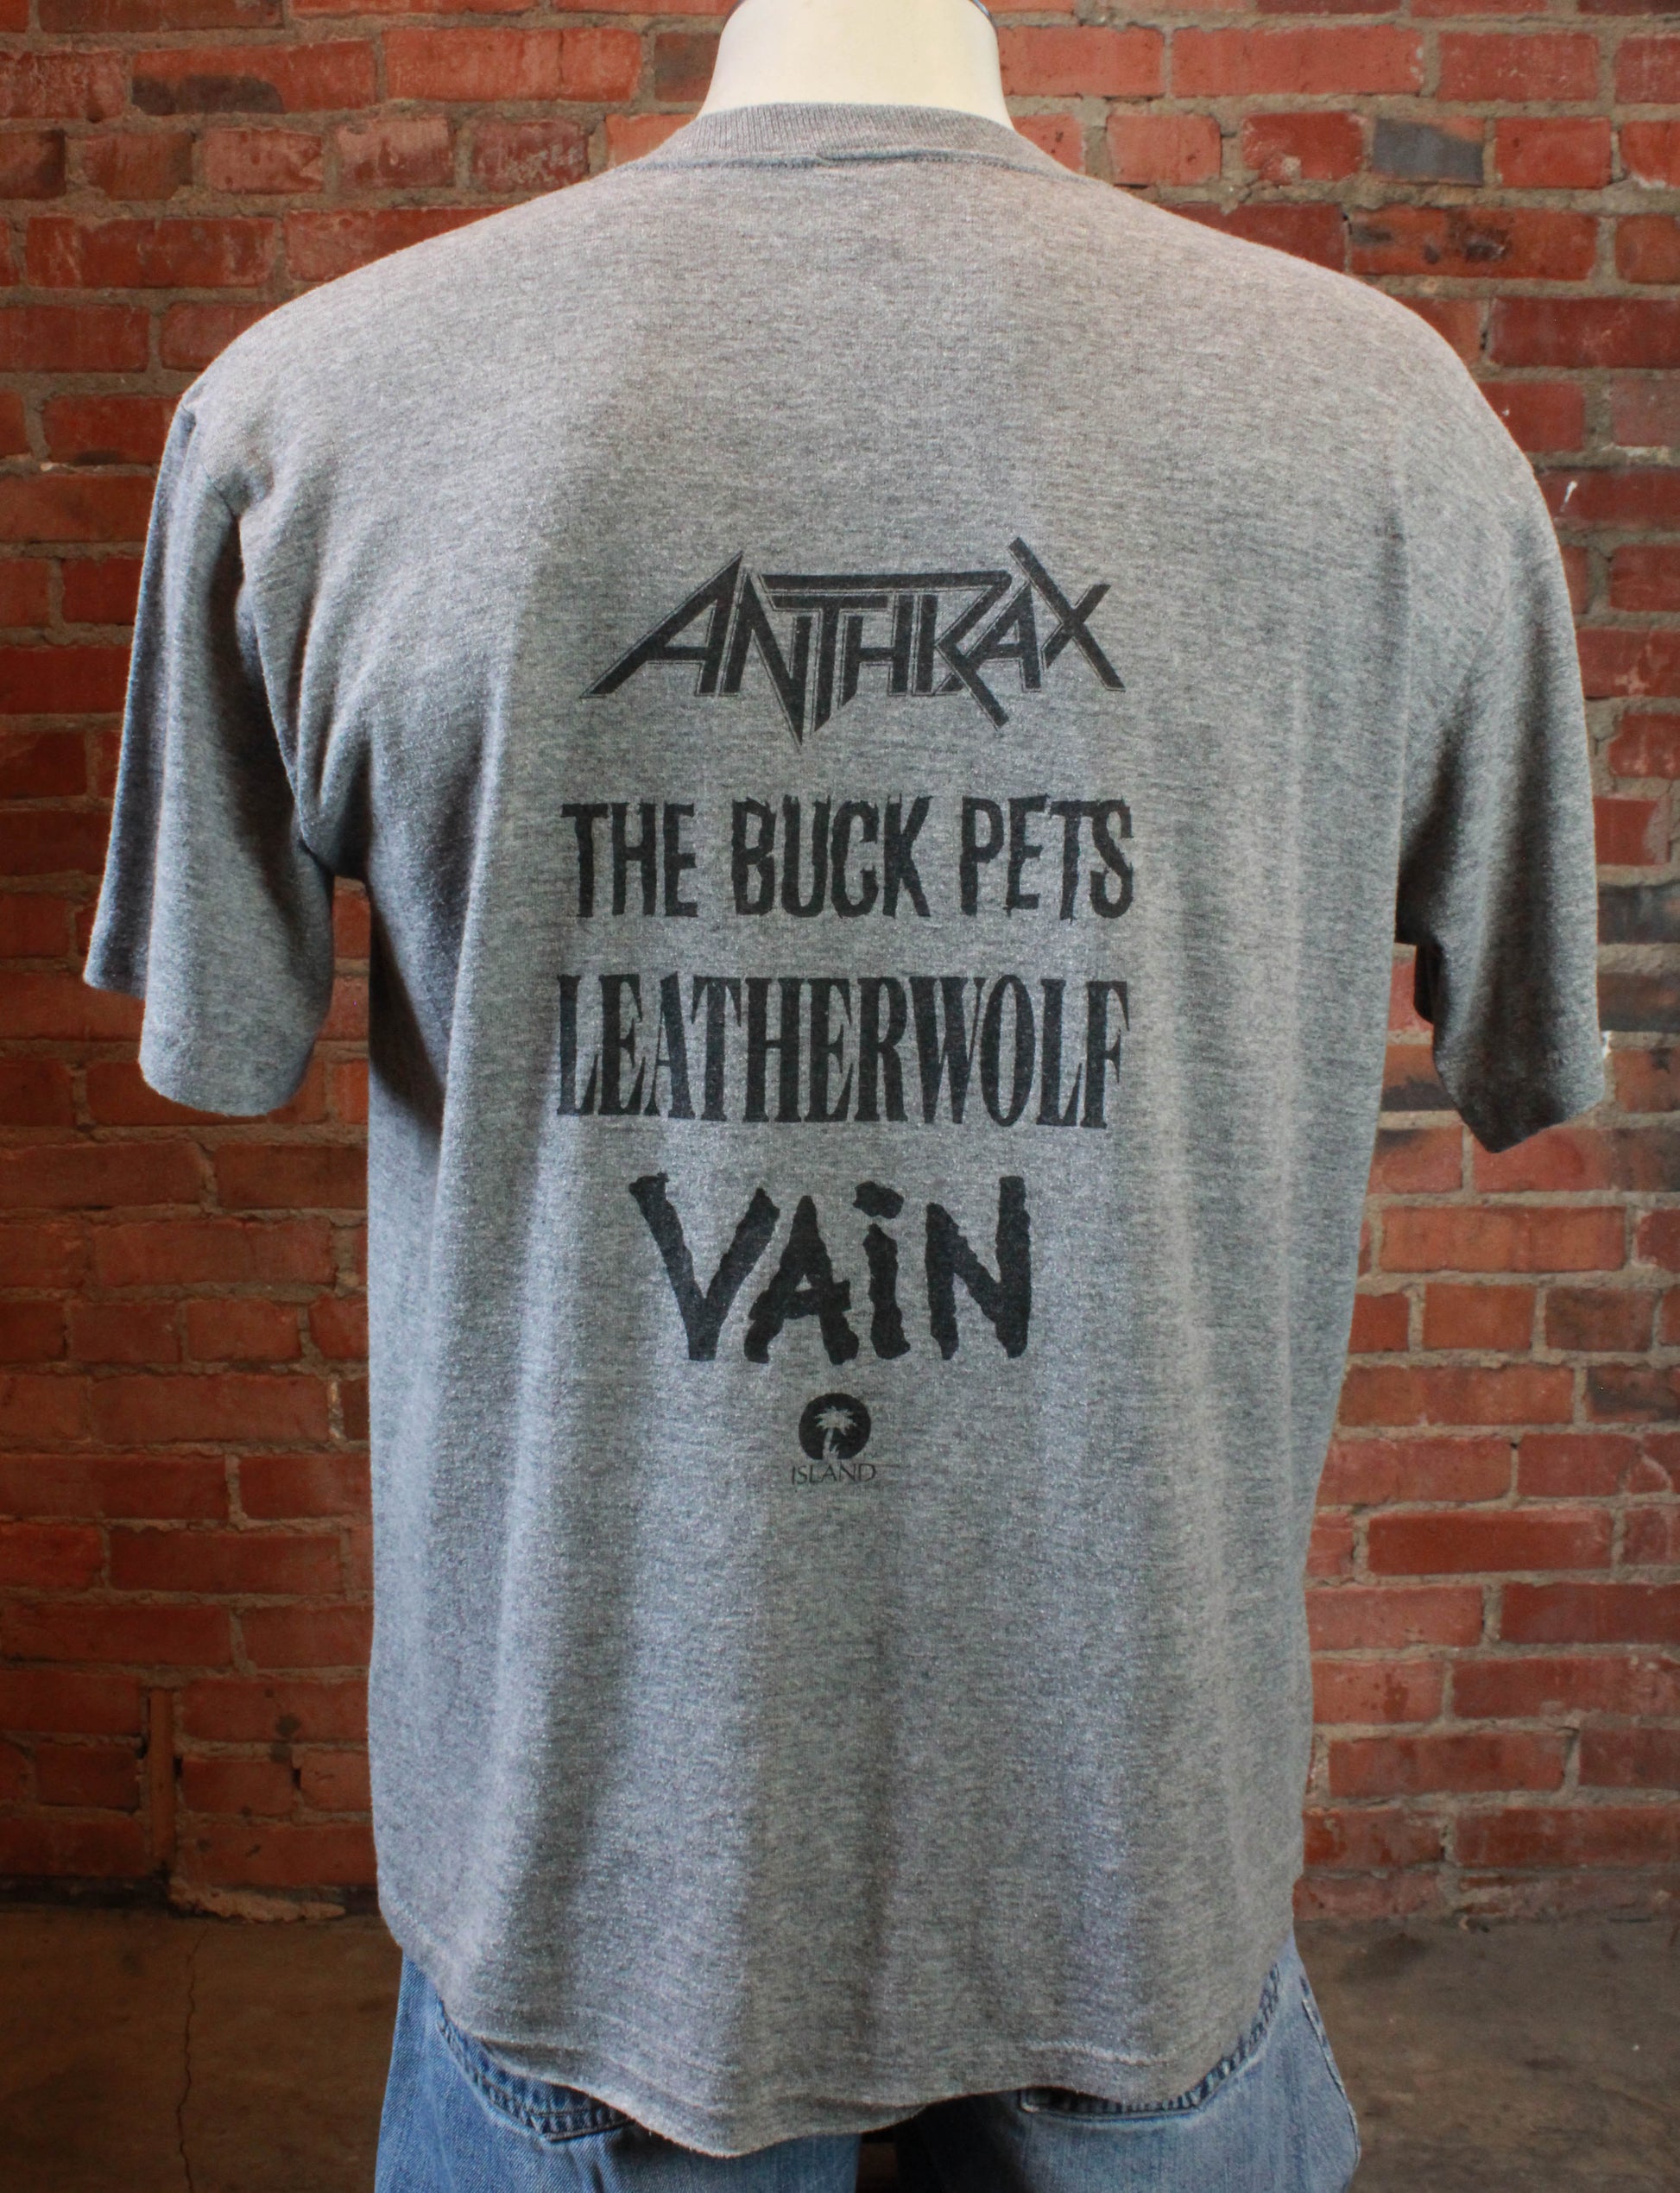 Vintage Island Records Promo T Shirt 80's Anthrax, The Buck Pets, Leatherwolf, Vain Extra Large